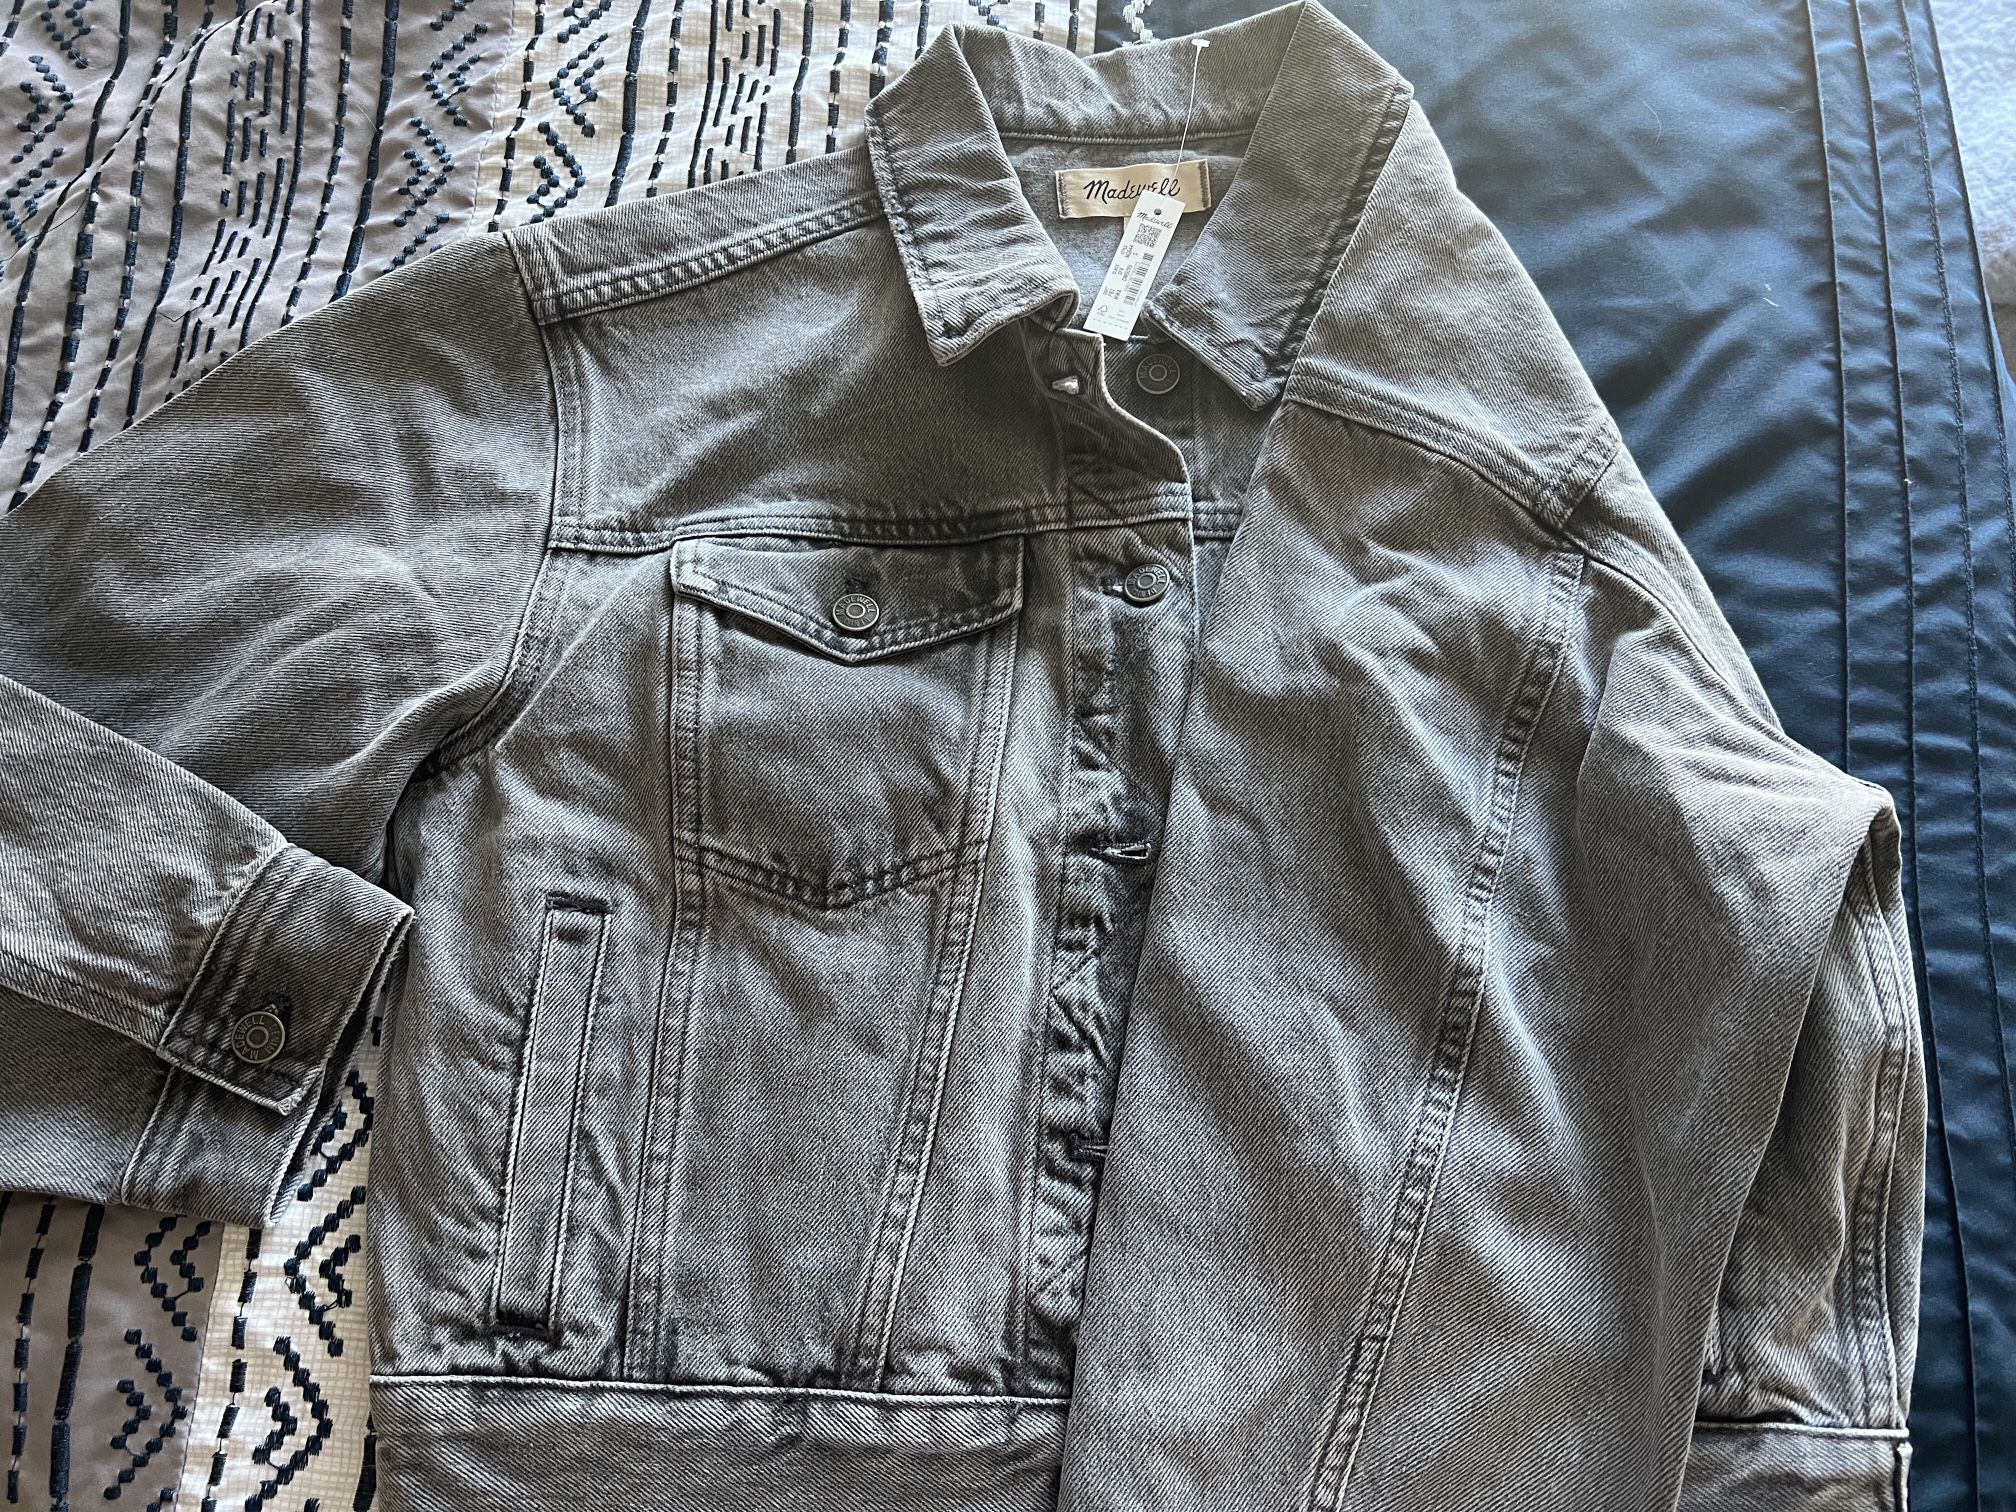 Madewell "The Oversized Trucker Jean Jacket" cropped, Size: Small, Color: Mornelle Wash, NWT